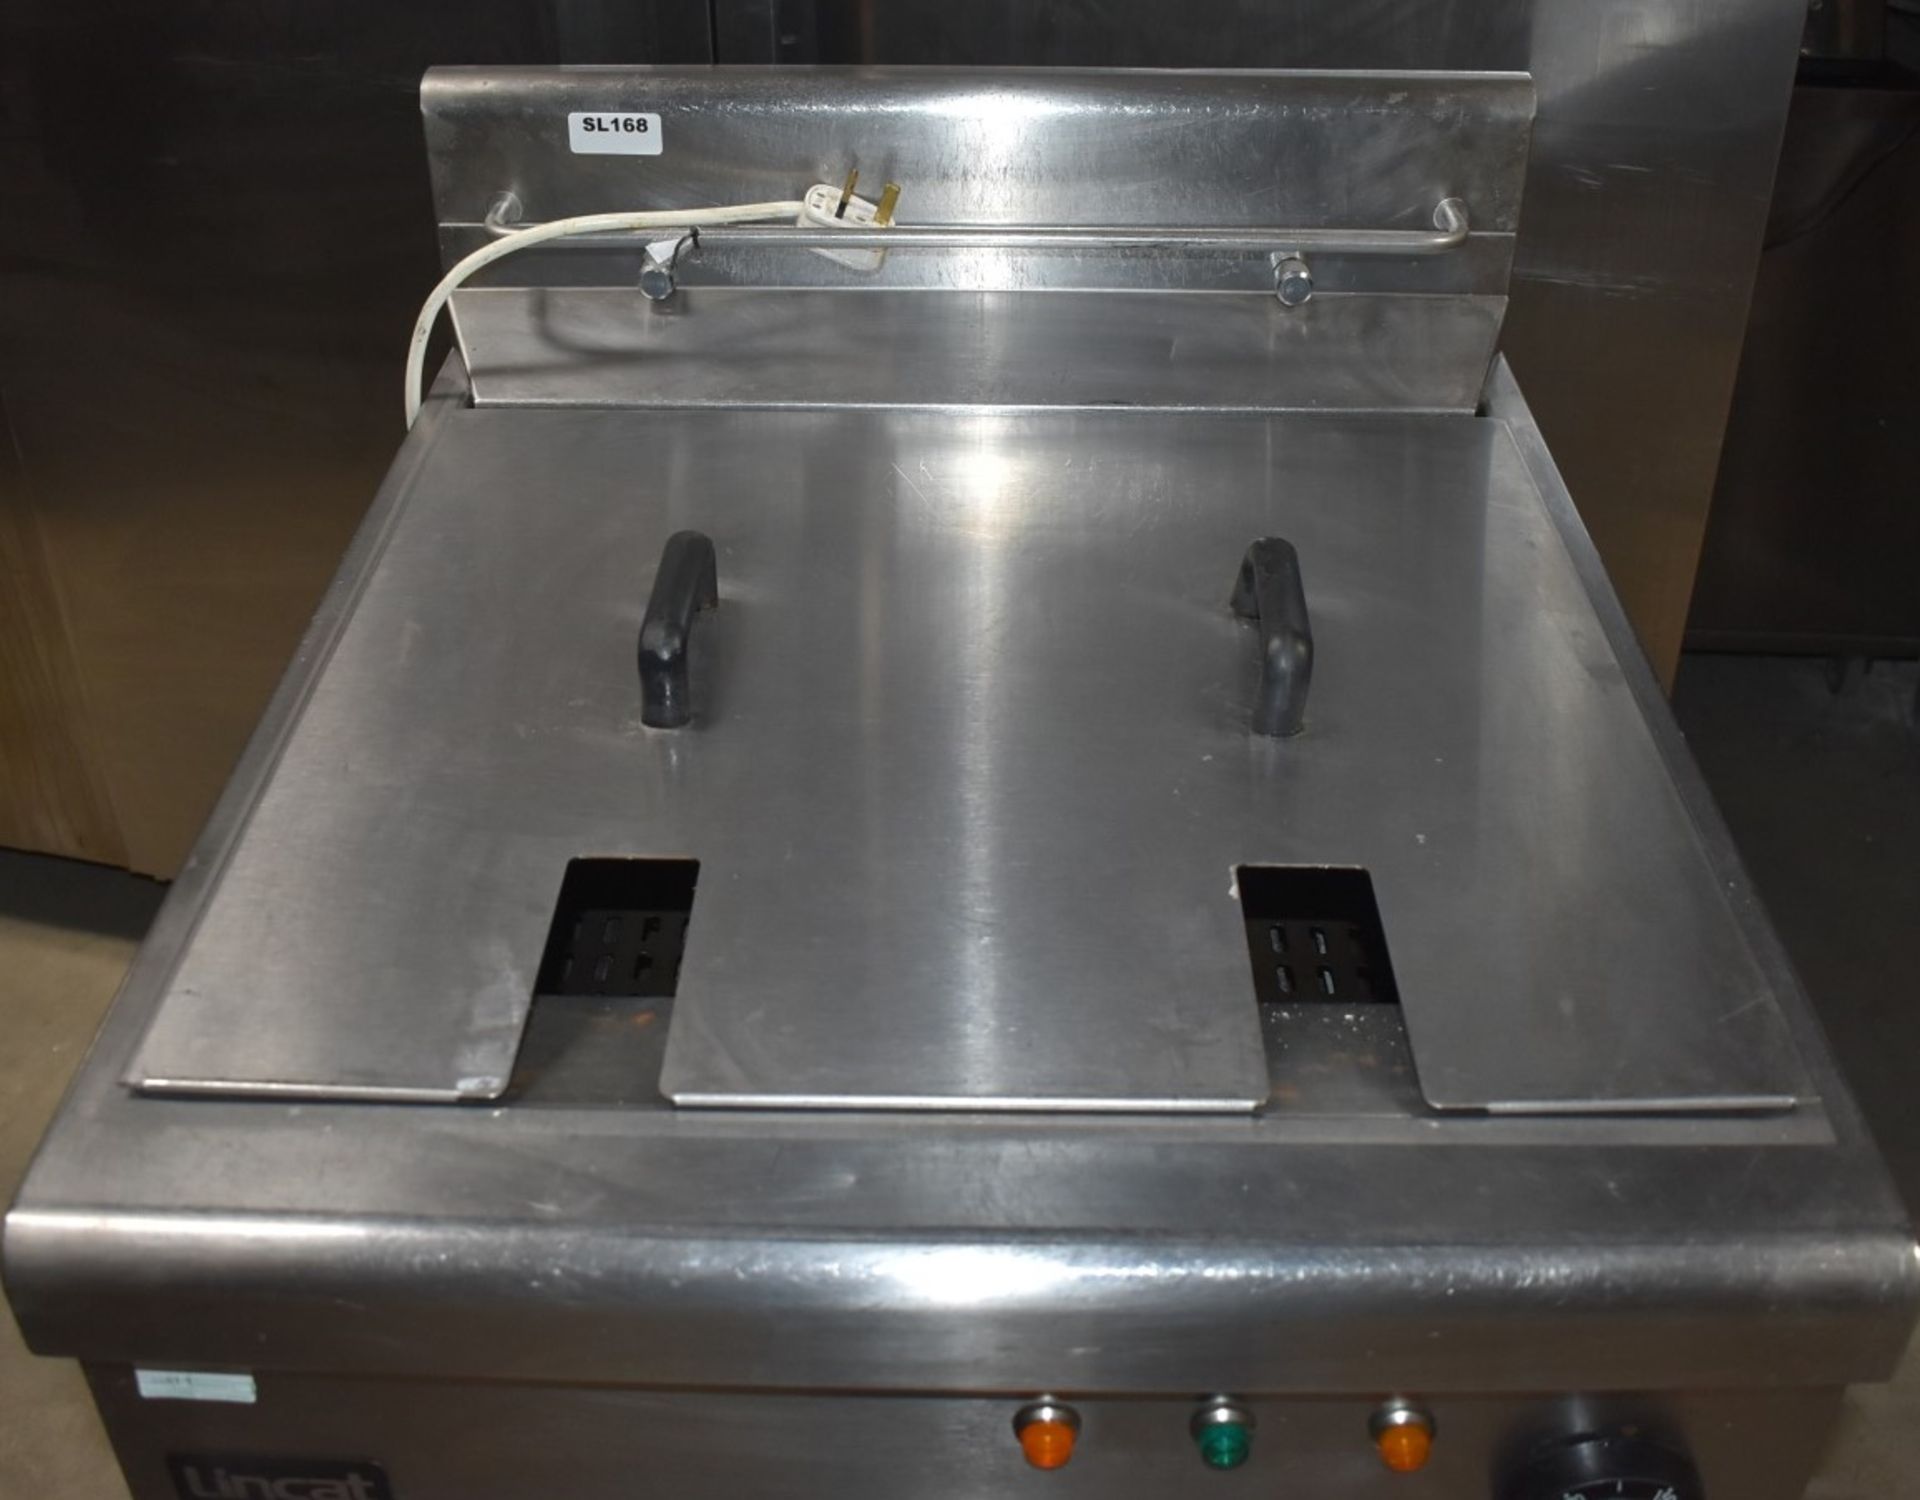 1 x Lincat Opus 700 Single Tank Electric Fryer With Built In Filtration - 3 Phase - Image 19 of 19